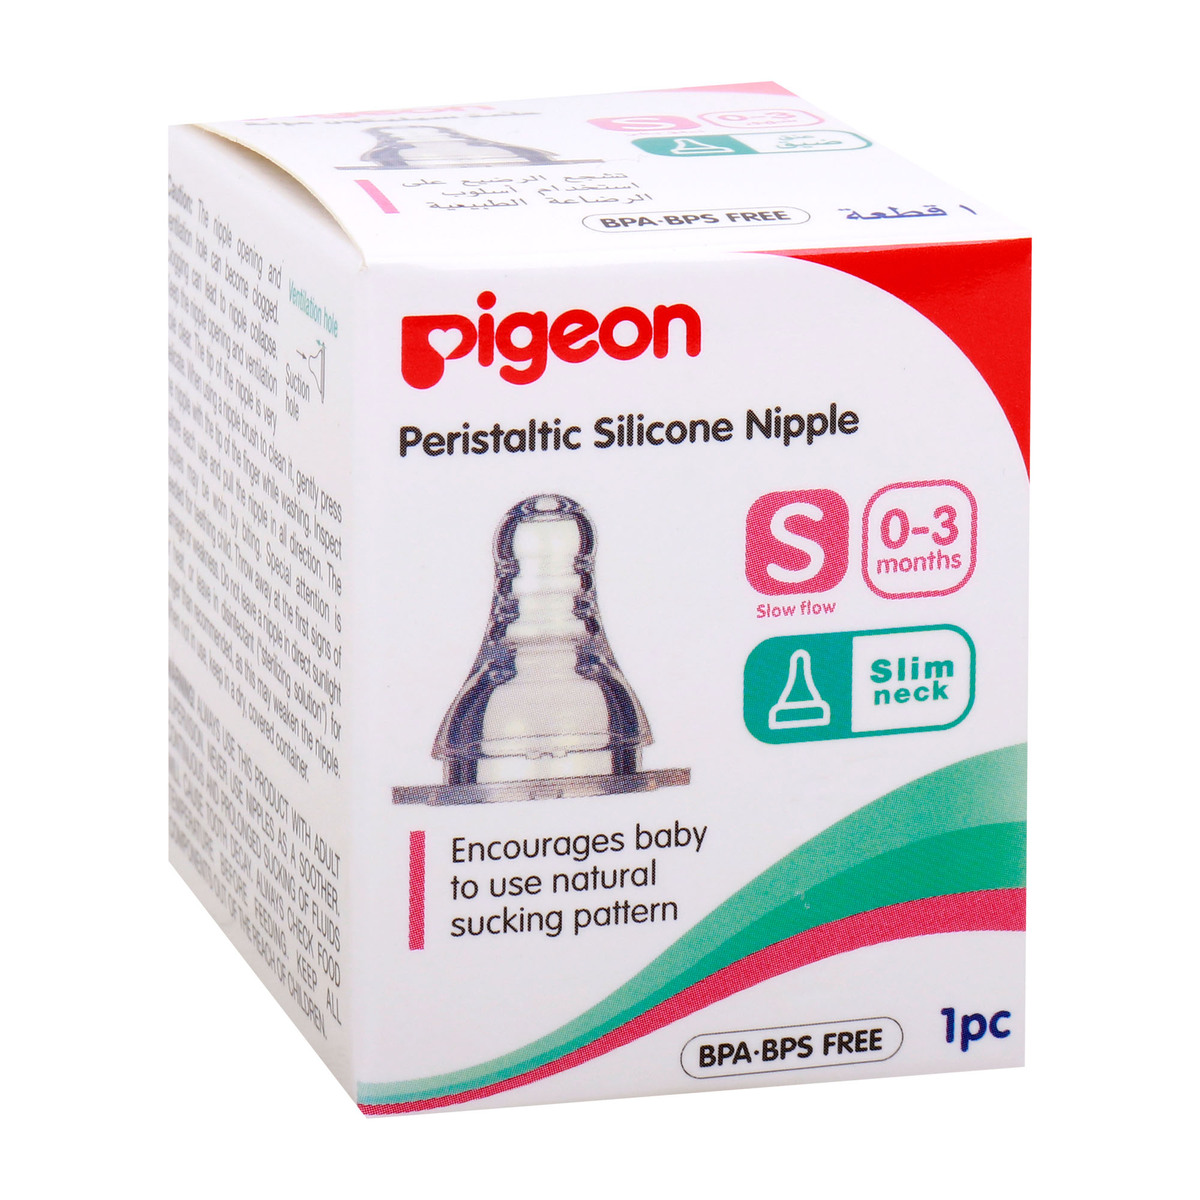 Pigeon Peristaltic Silicone Nipple Small From 0-3 Months 1 pc